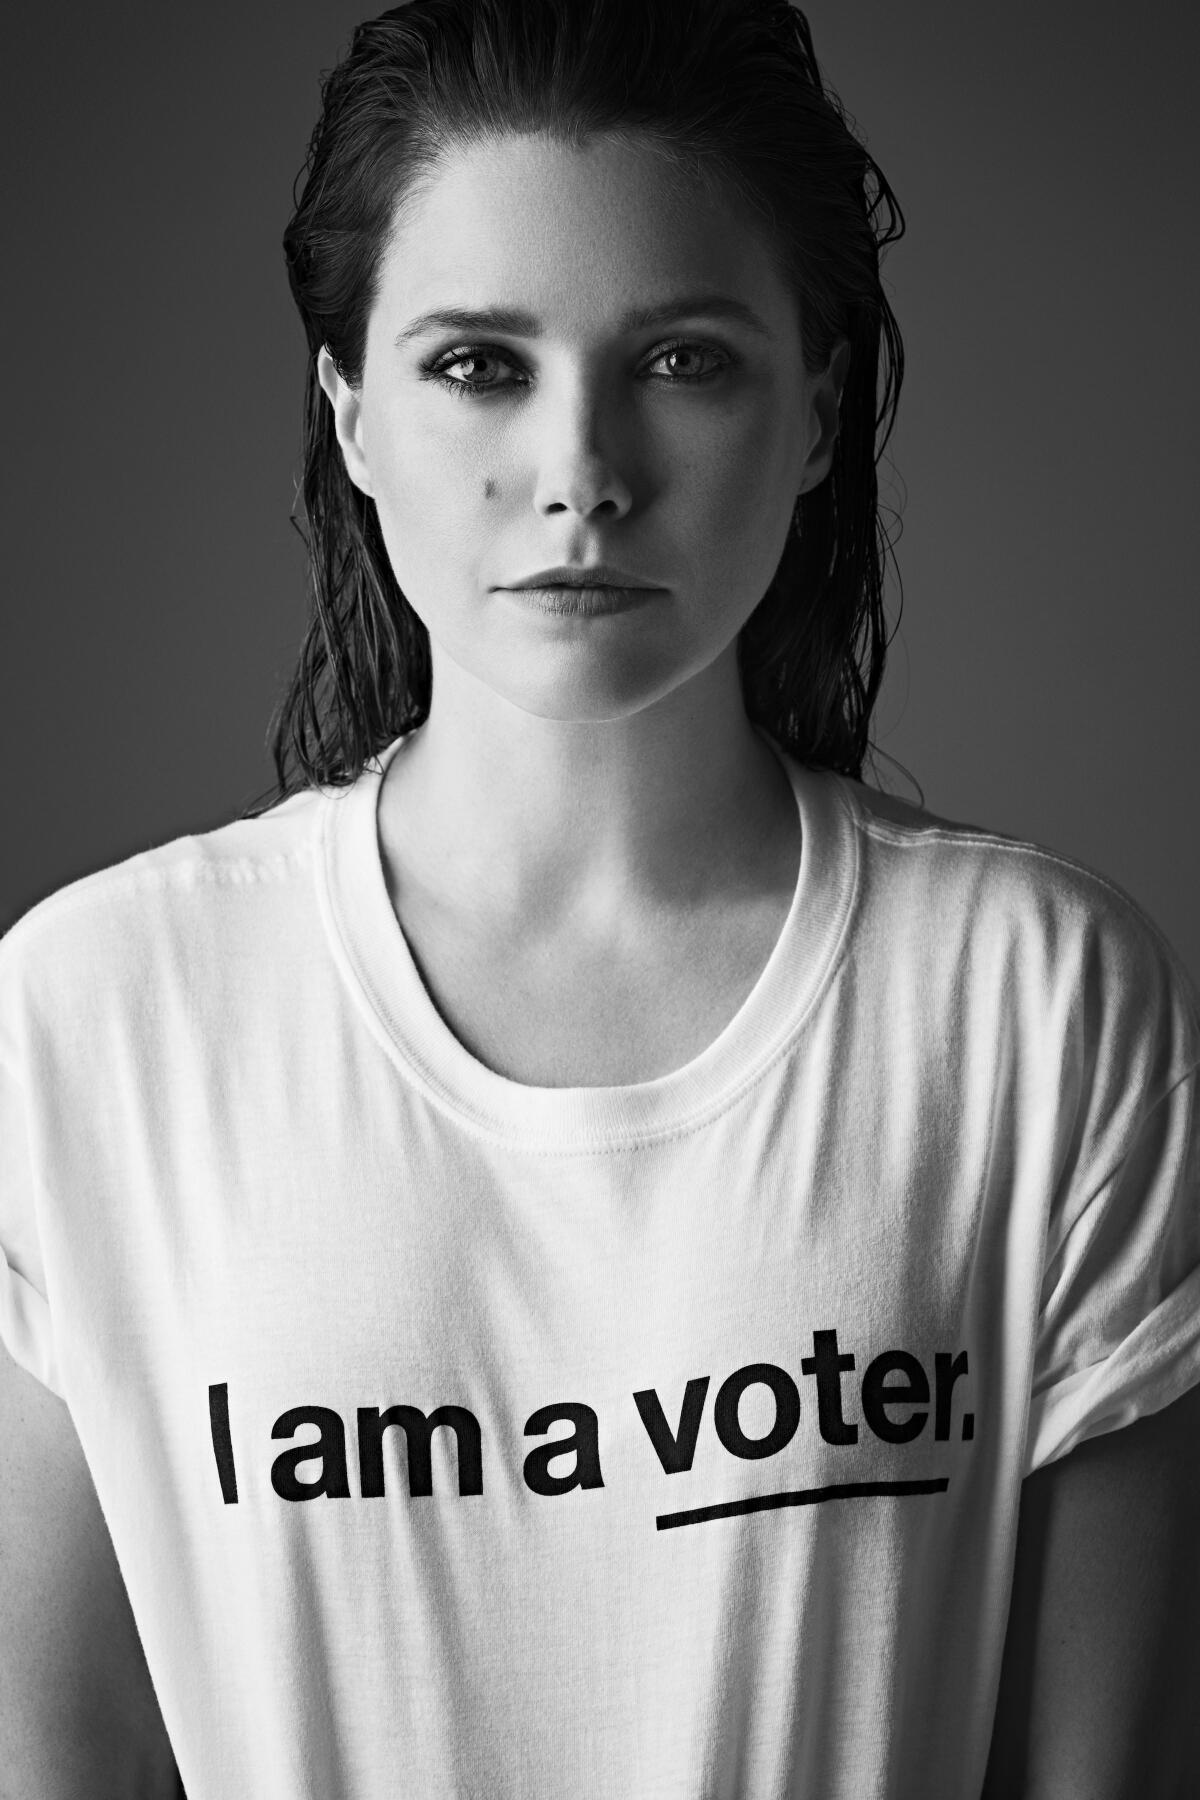 A campaign image of actress Sophia Bush wearing an I Am a Voter T-shirt.